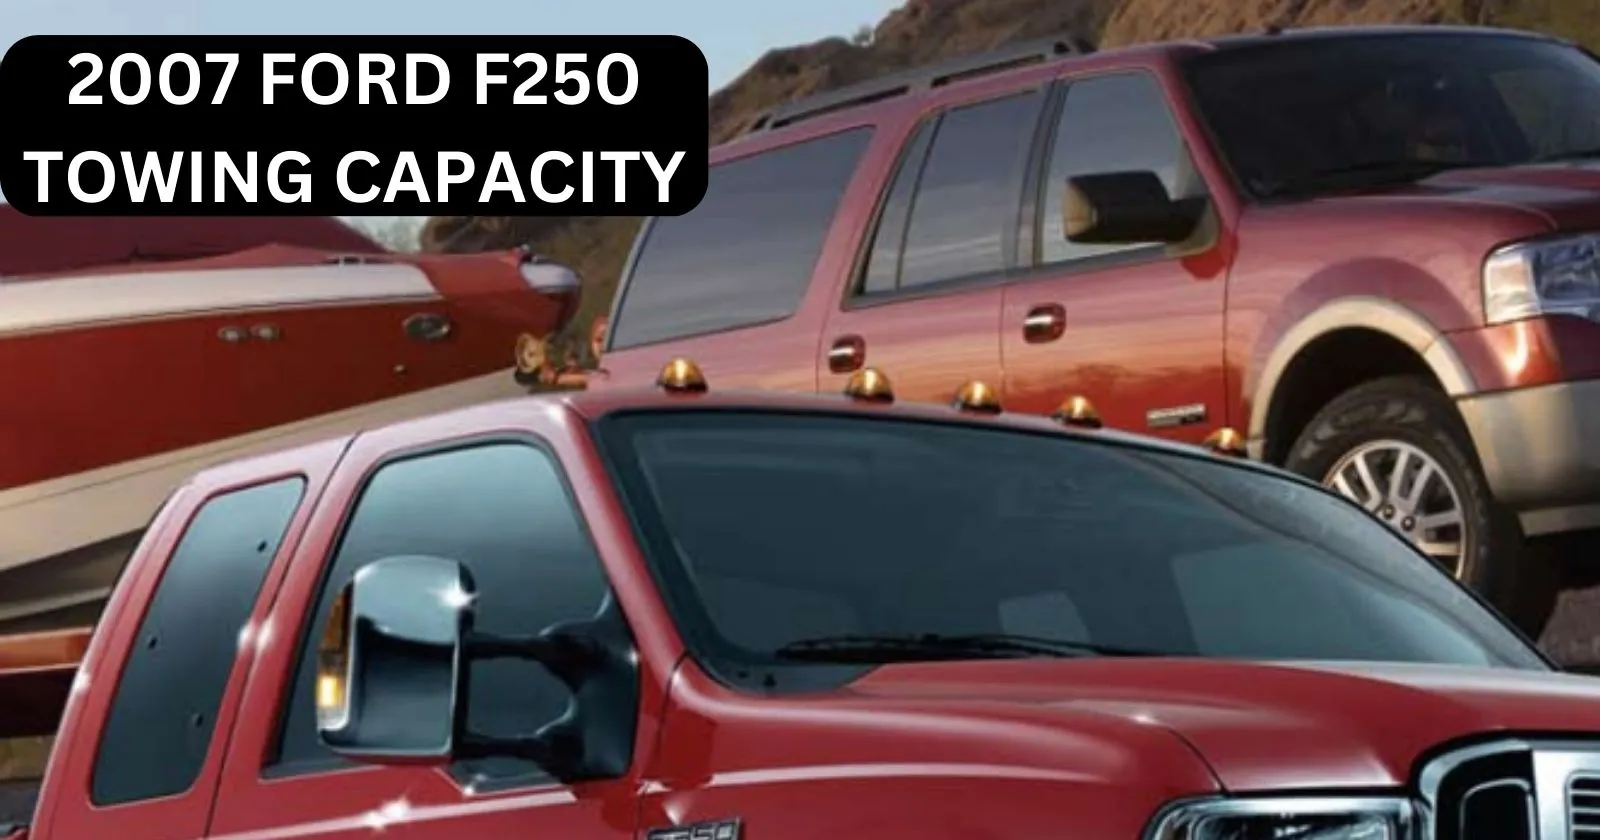 explore-2007-ford-f250-towing-capacity-with-chart-thecartowing